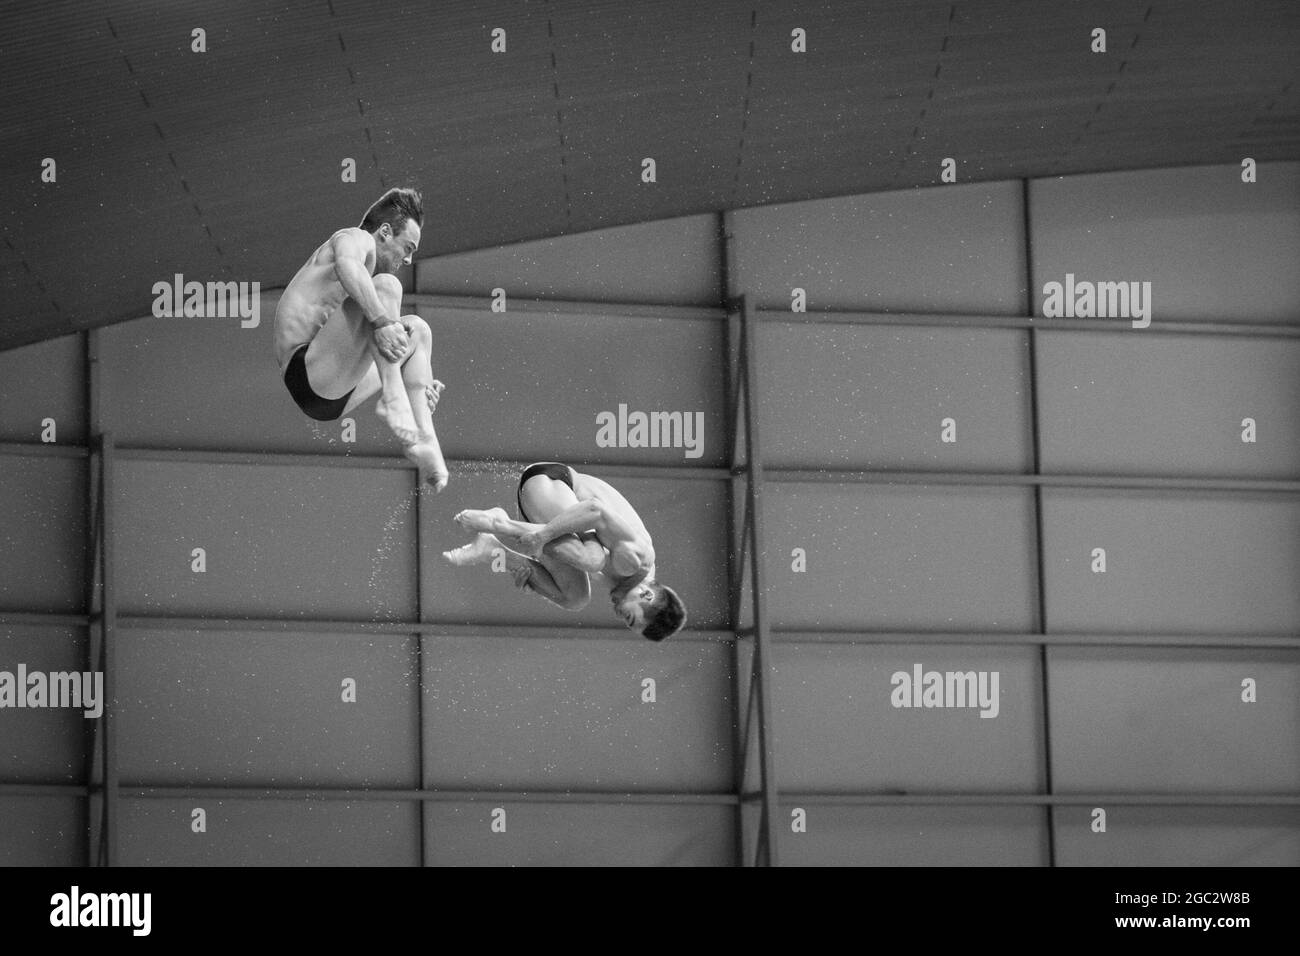 British divers Tom Daley (front) and Daniel Goodfellow in a 10m platform synchro dive, European Diving Championships, London, UK Stock Photo